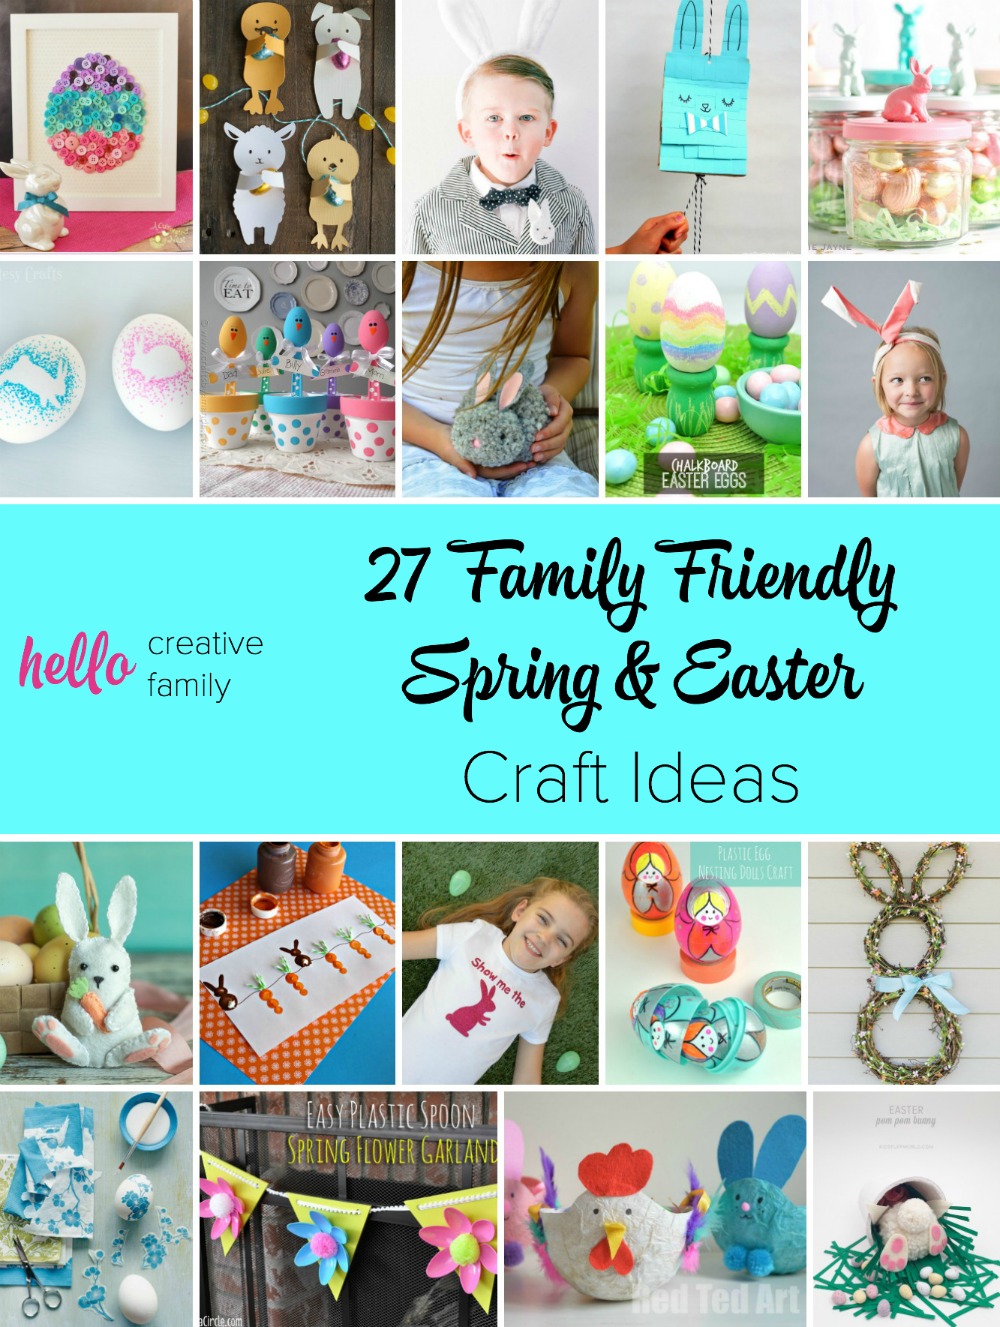 So many adorable spring and Easter craft ideas here! I love that they are family friendly and that the kids can help with these Easter crafts! My kiddo would love number 26!